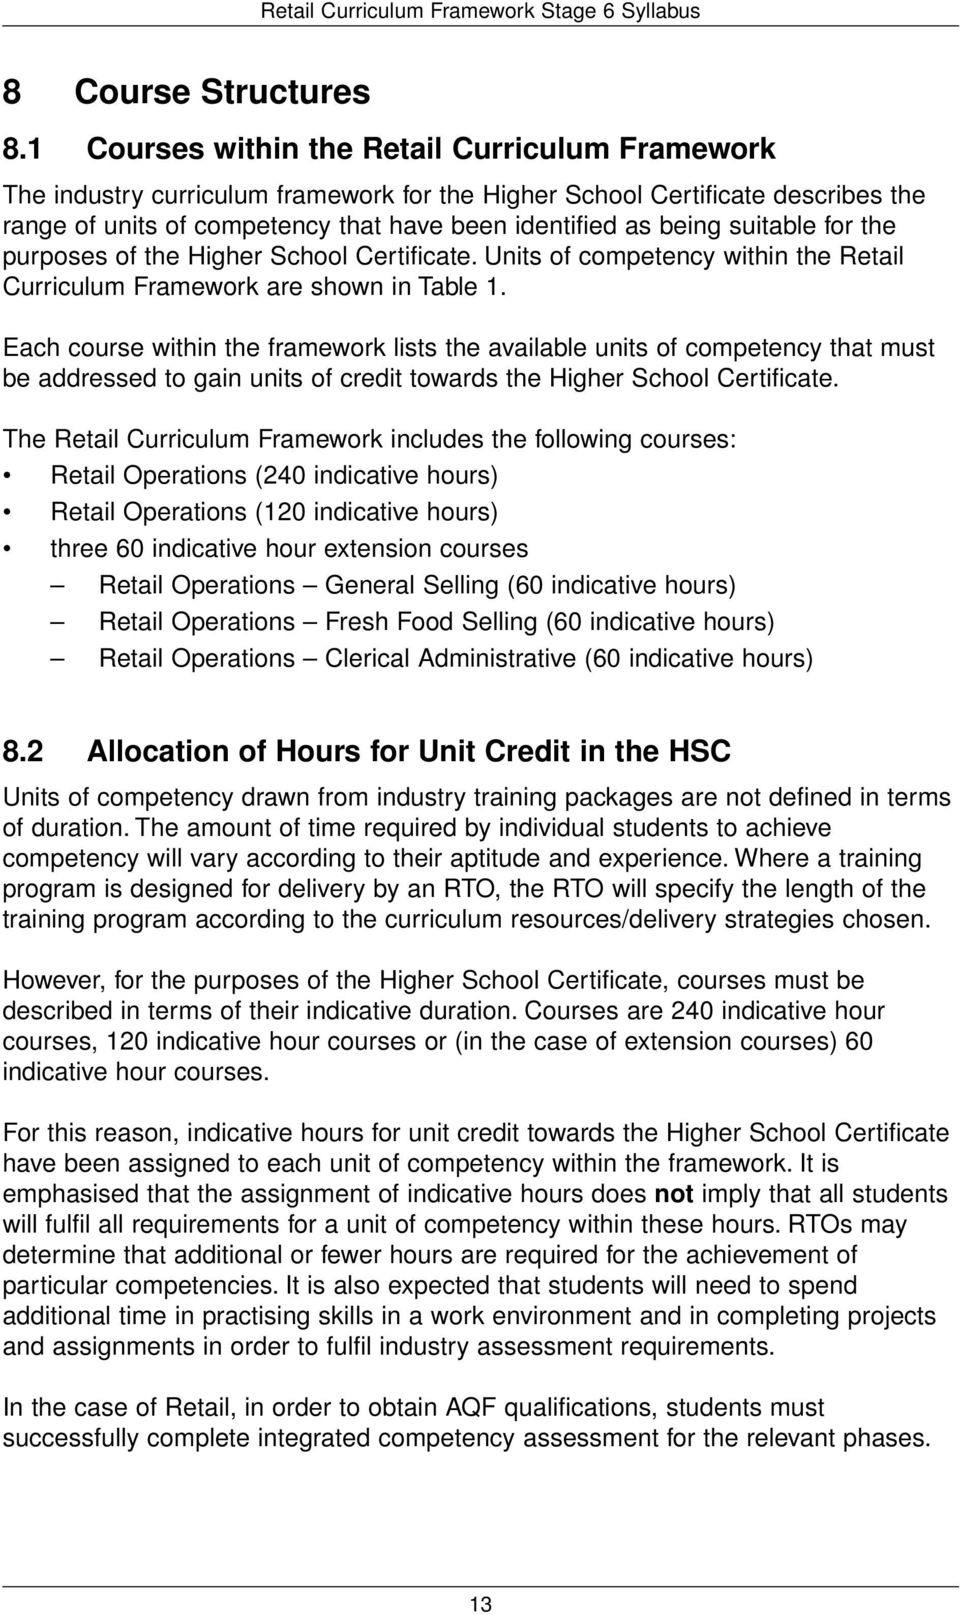 suitable for the purposes of the Higher School Certificate. Units of competency within the Retail Curriculum Framework are shown in Table 1.